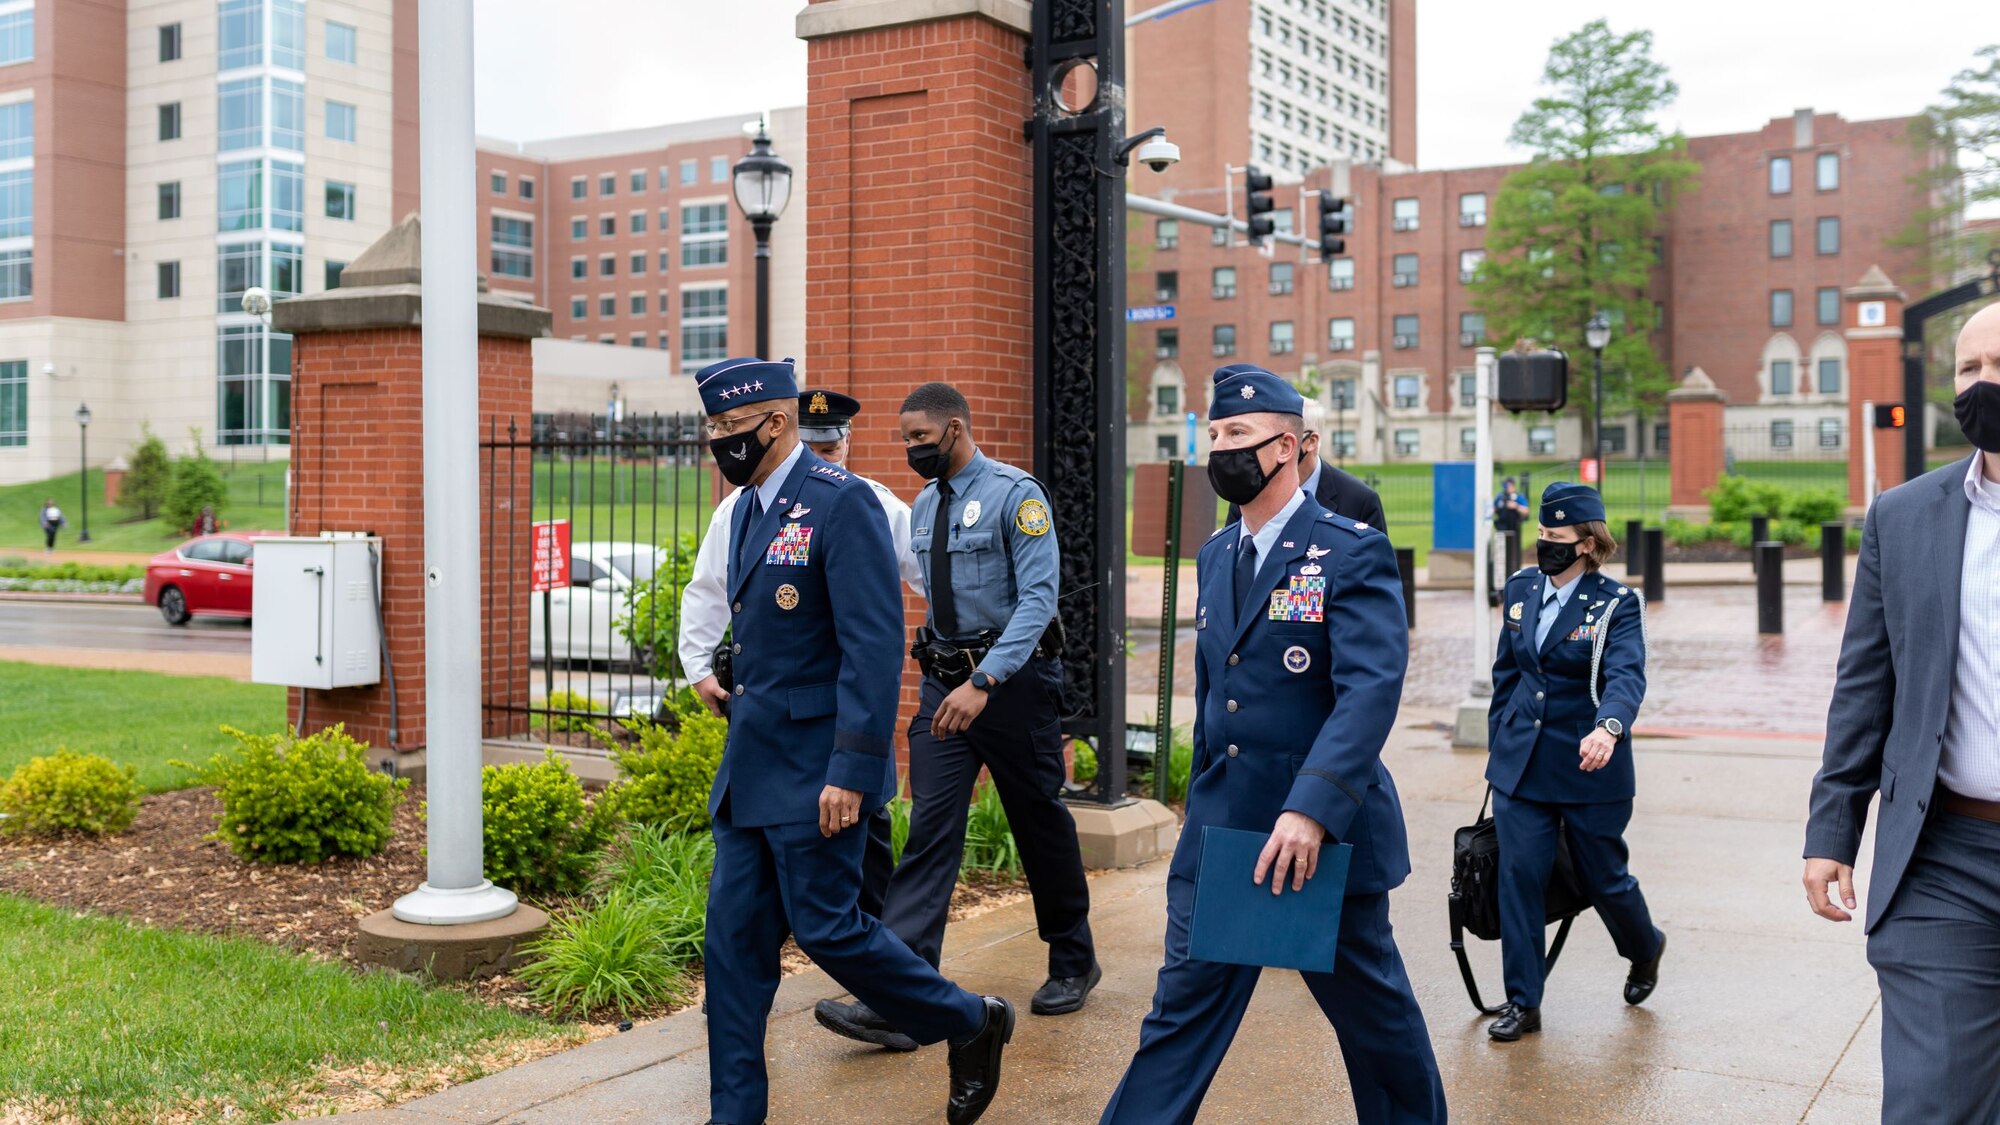 Air Force Chief of Staff Gen. Charles Q. Brown, Jr. arrives at Busch Student Center to speak at a an Air
Force ROTC leadership laboratory at Saint Louis University, St. Louis, Missouri April 28, 2021. AFROTC
Detachment 207 207 at SLU is composed of 85 students from nine schools in the Metro St. Louis area,
representing diverse backgrounds, areas of study and career interests. (U.S. Air Force photo by Cadet
Phillip Casey)